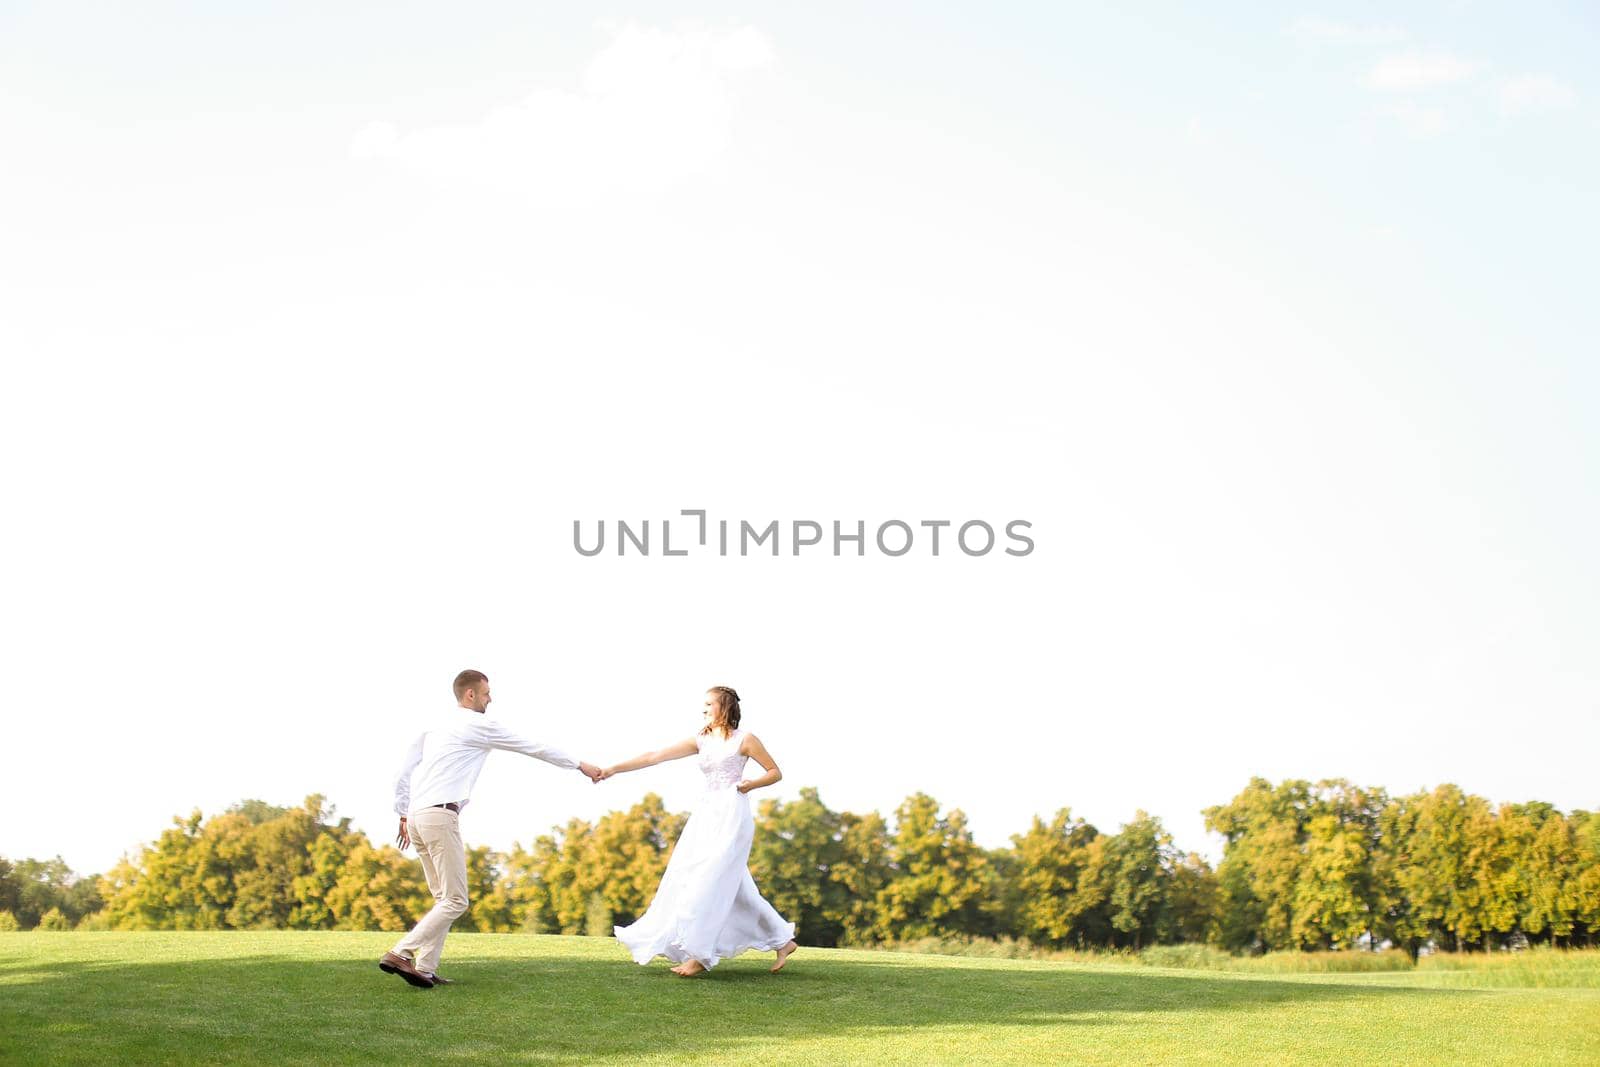 Groom and bride dancing and playing on grass. Concept of wedding photo session on open air and nature.